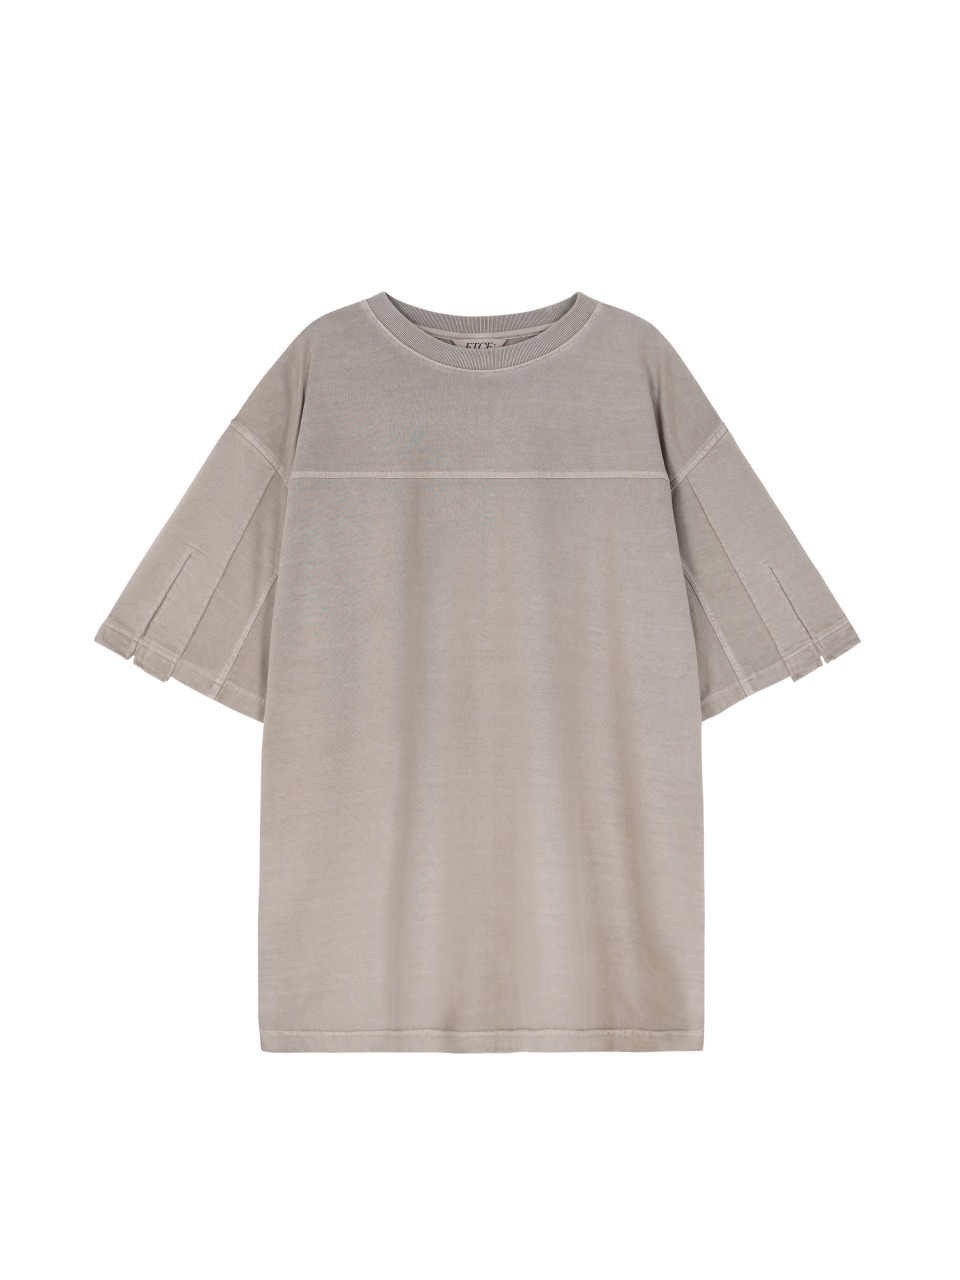 ETCE - LAYERED ARMOR T-SHIRT (BEIGE)